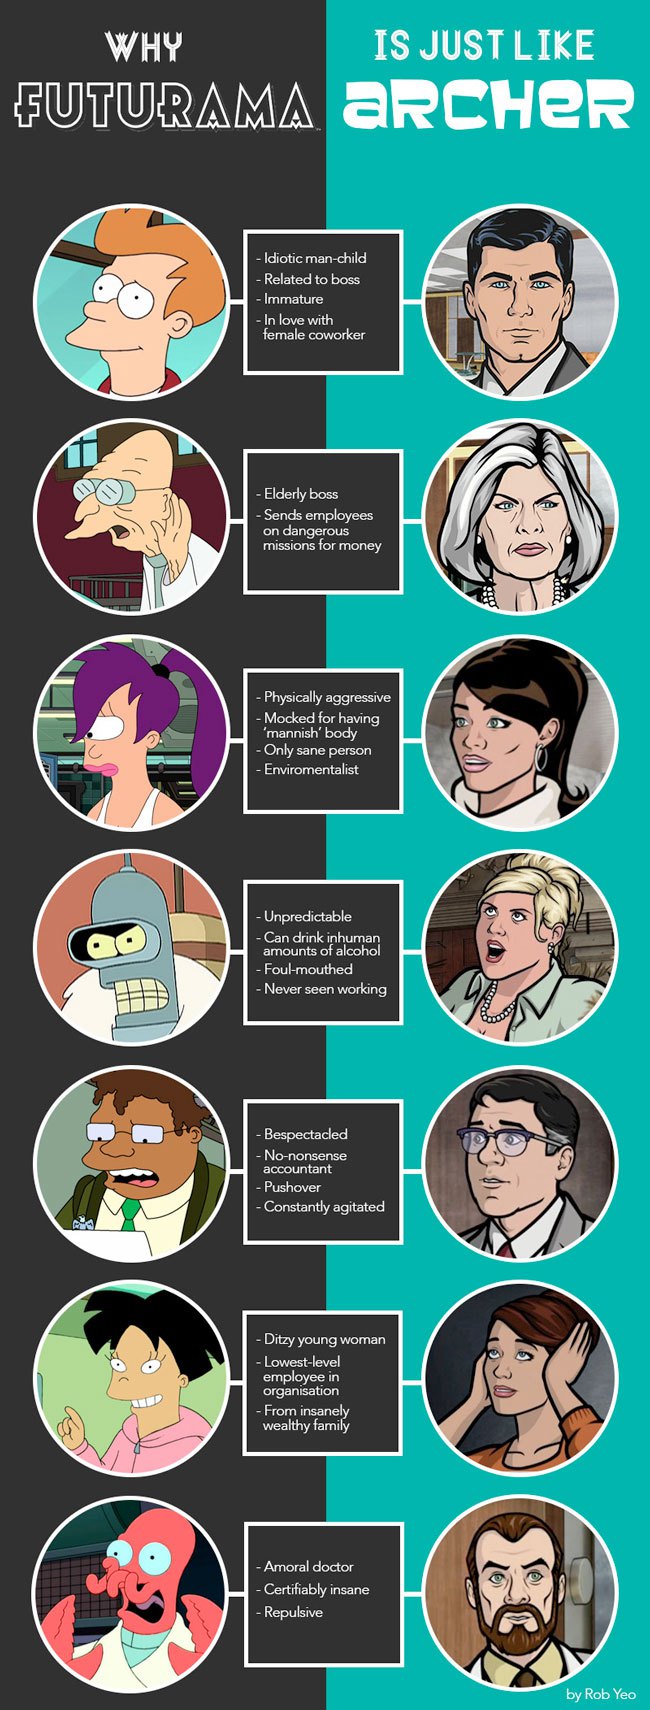 Why Futurama is Just Like Archer